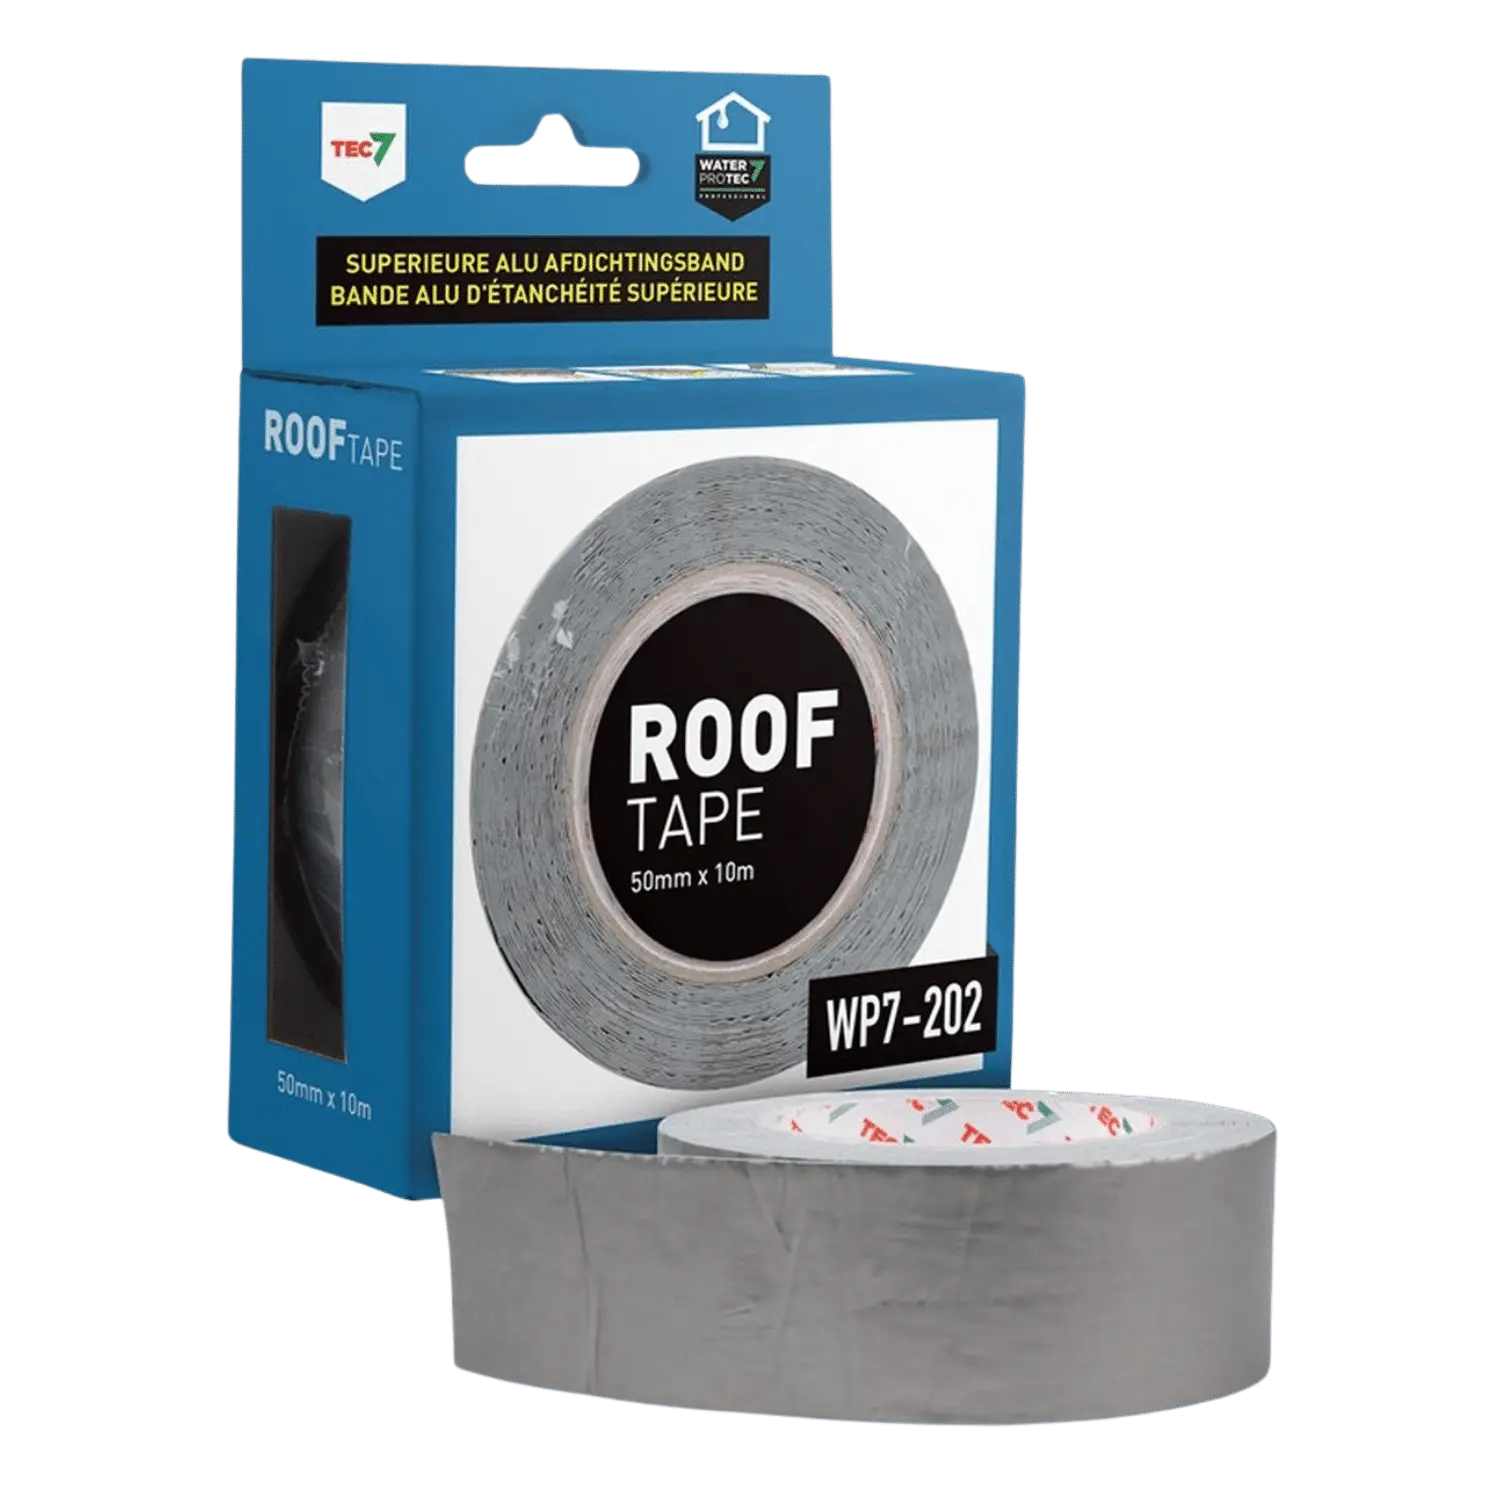 WP7-202 Roof tape 50mmx10m